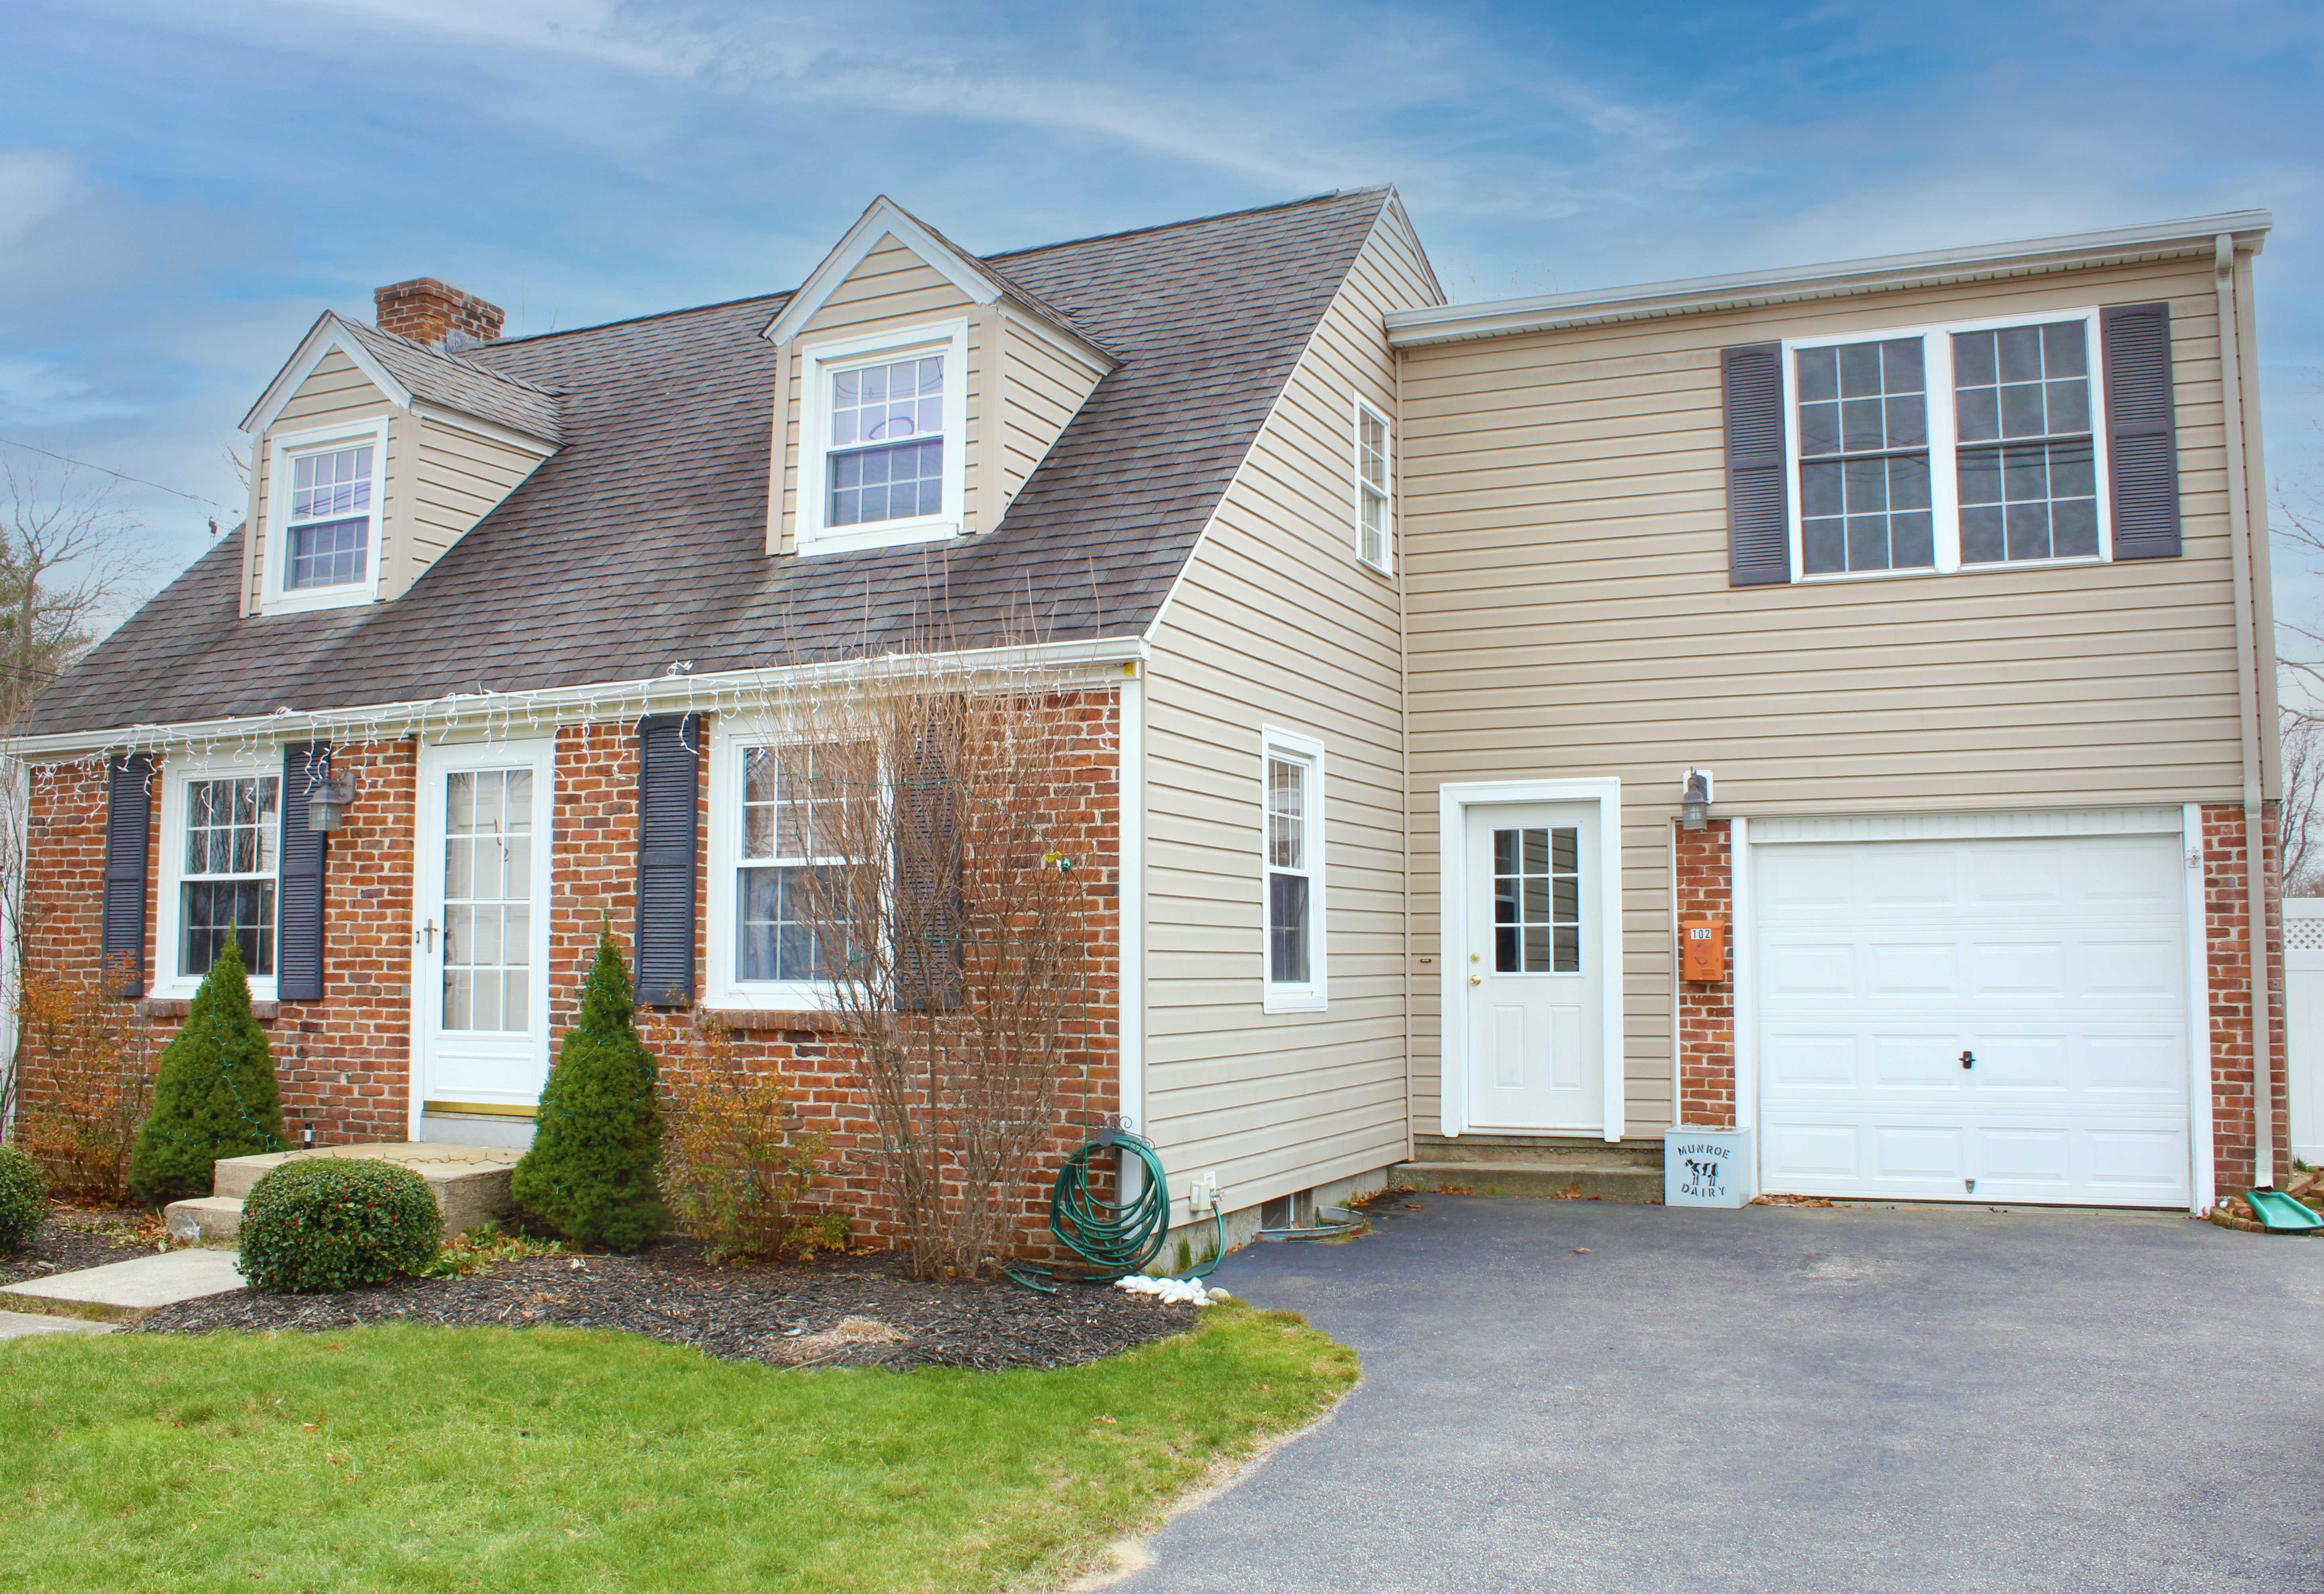 Amazing 3 bed Cape For Sale in Warwick Rhode Island